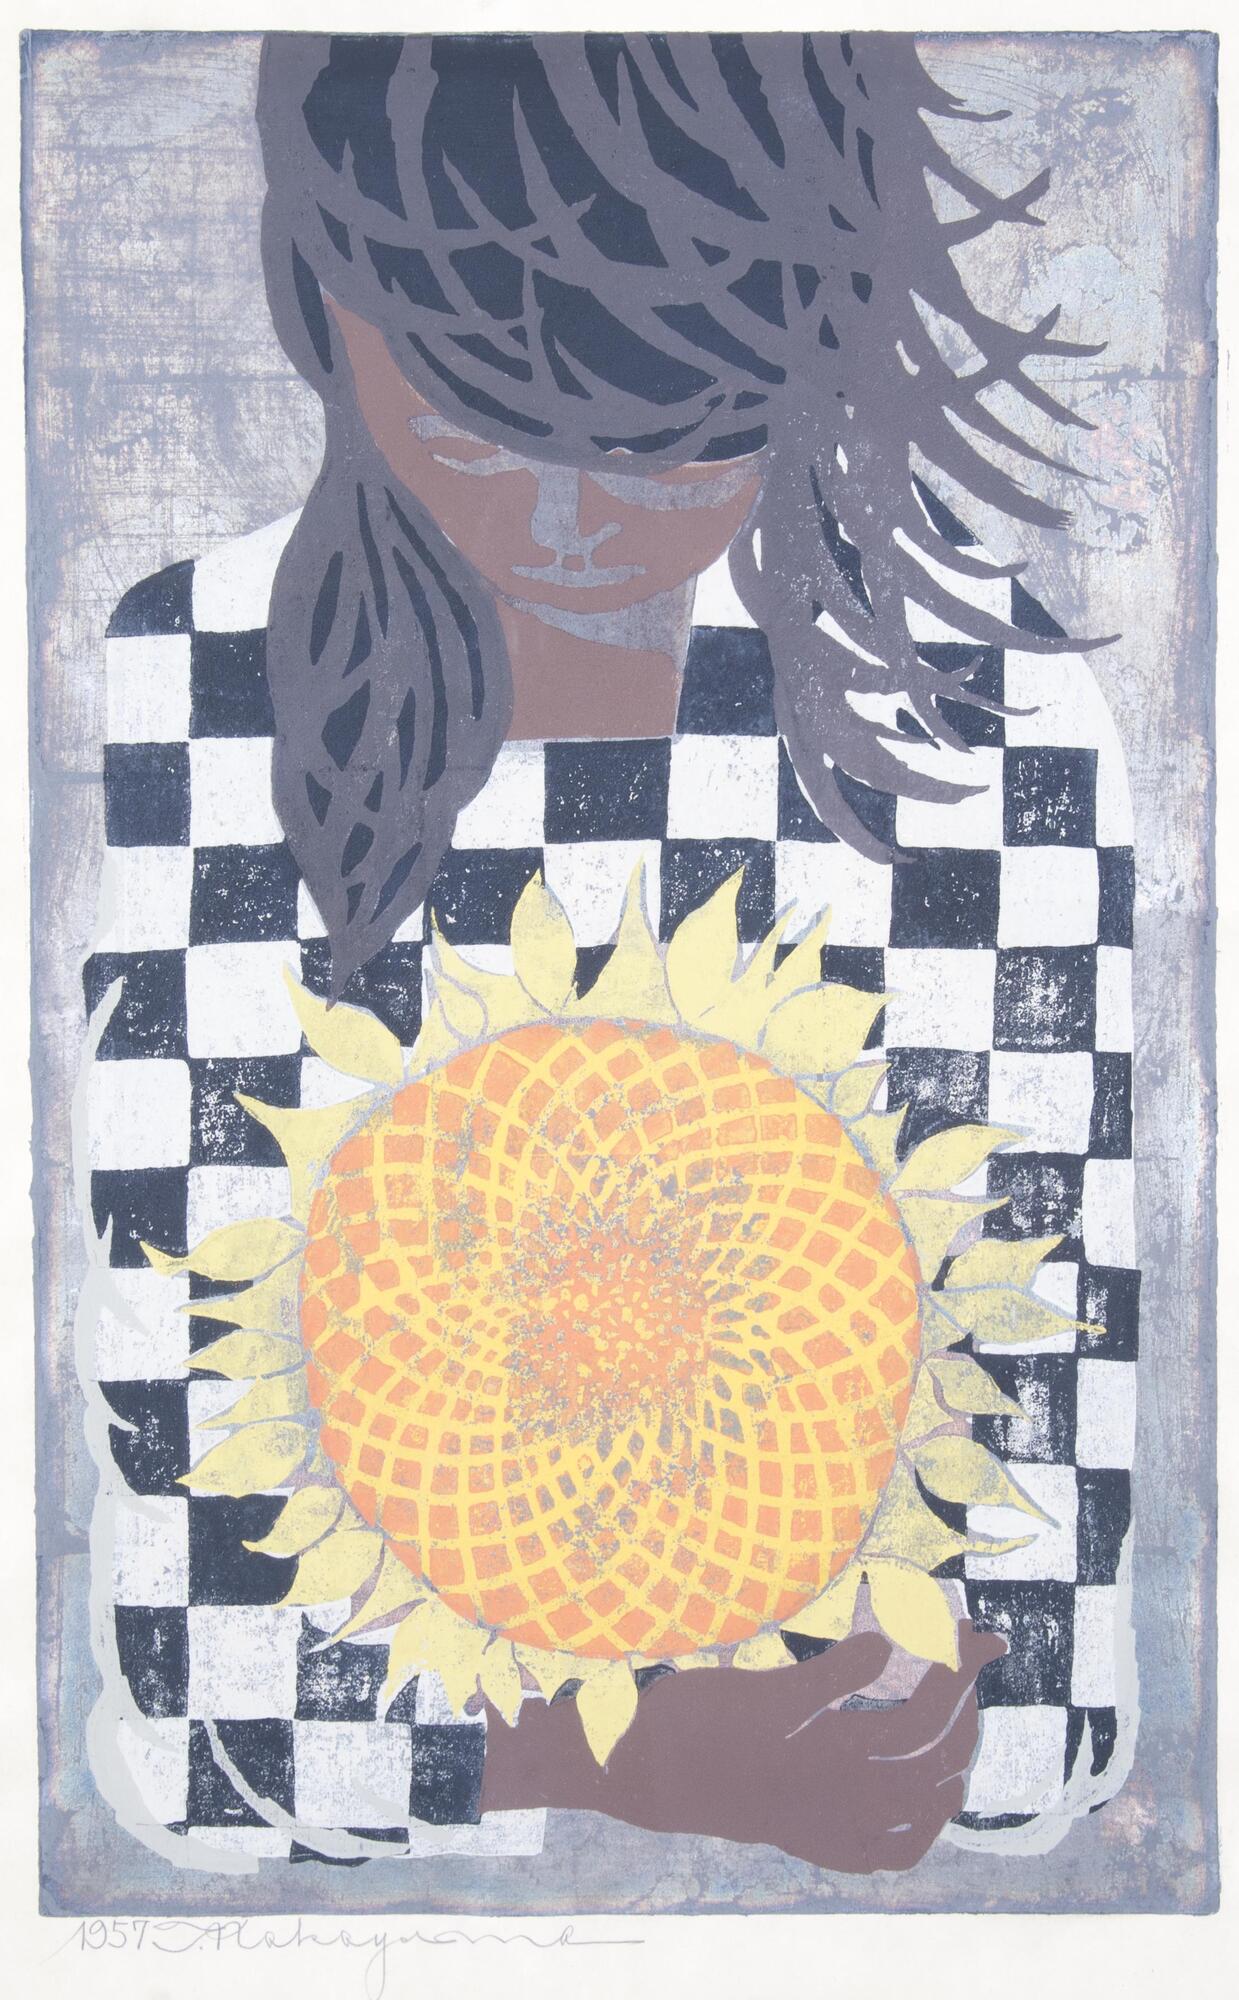 A portrait of a girl wearing a black and white checkered shirt, looking down at the sunflower she is holding in her crossed arms.